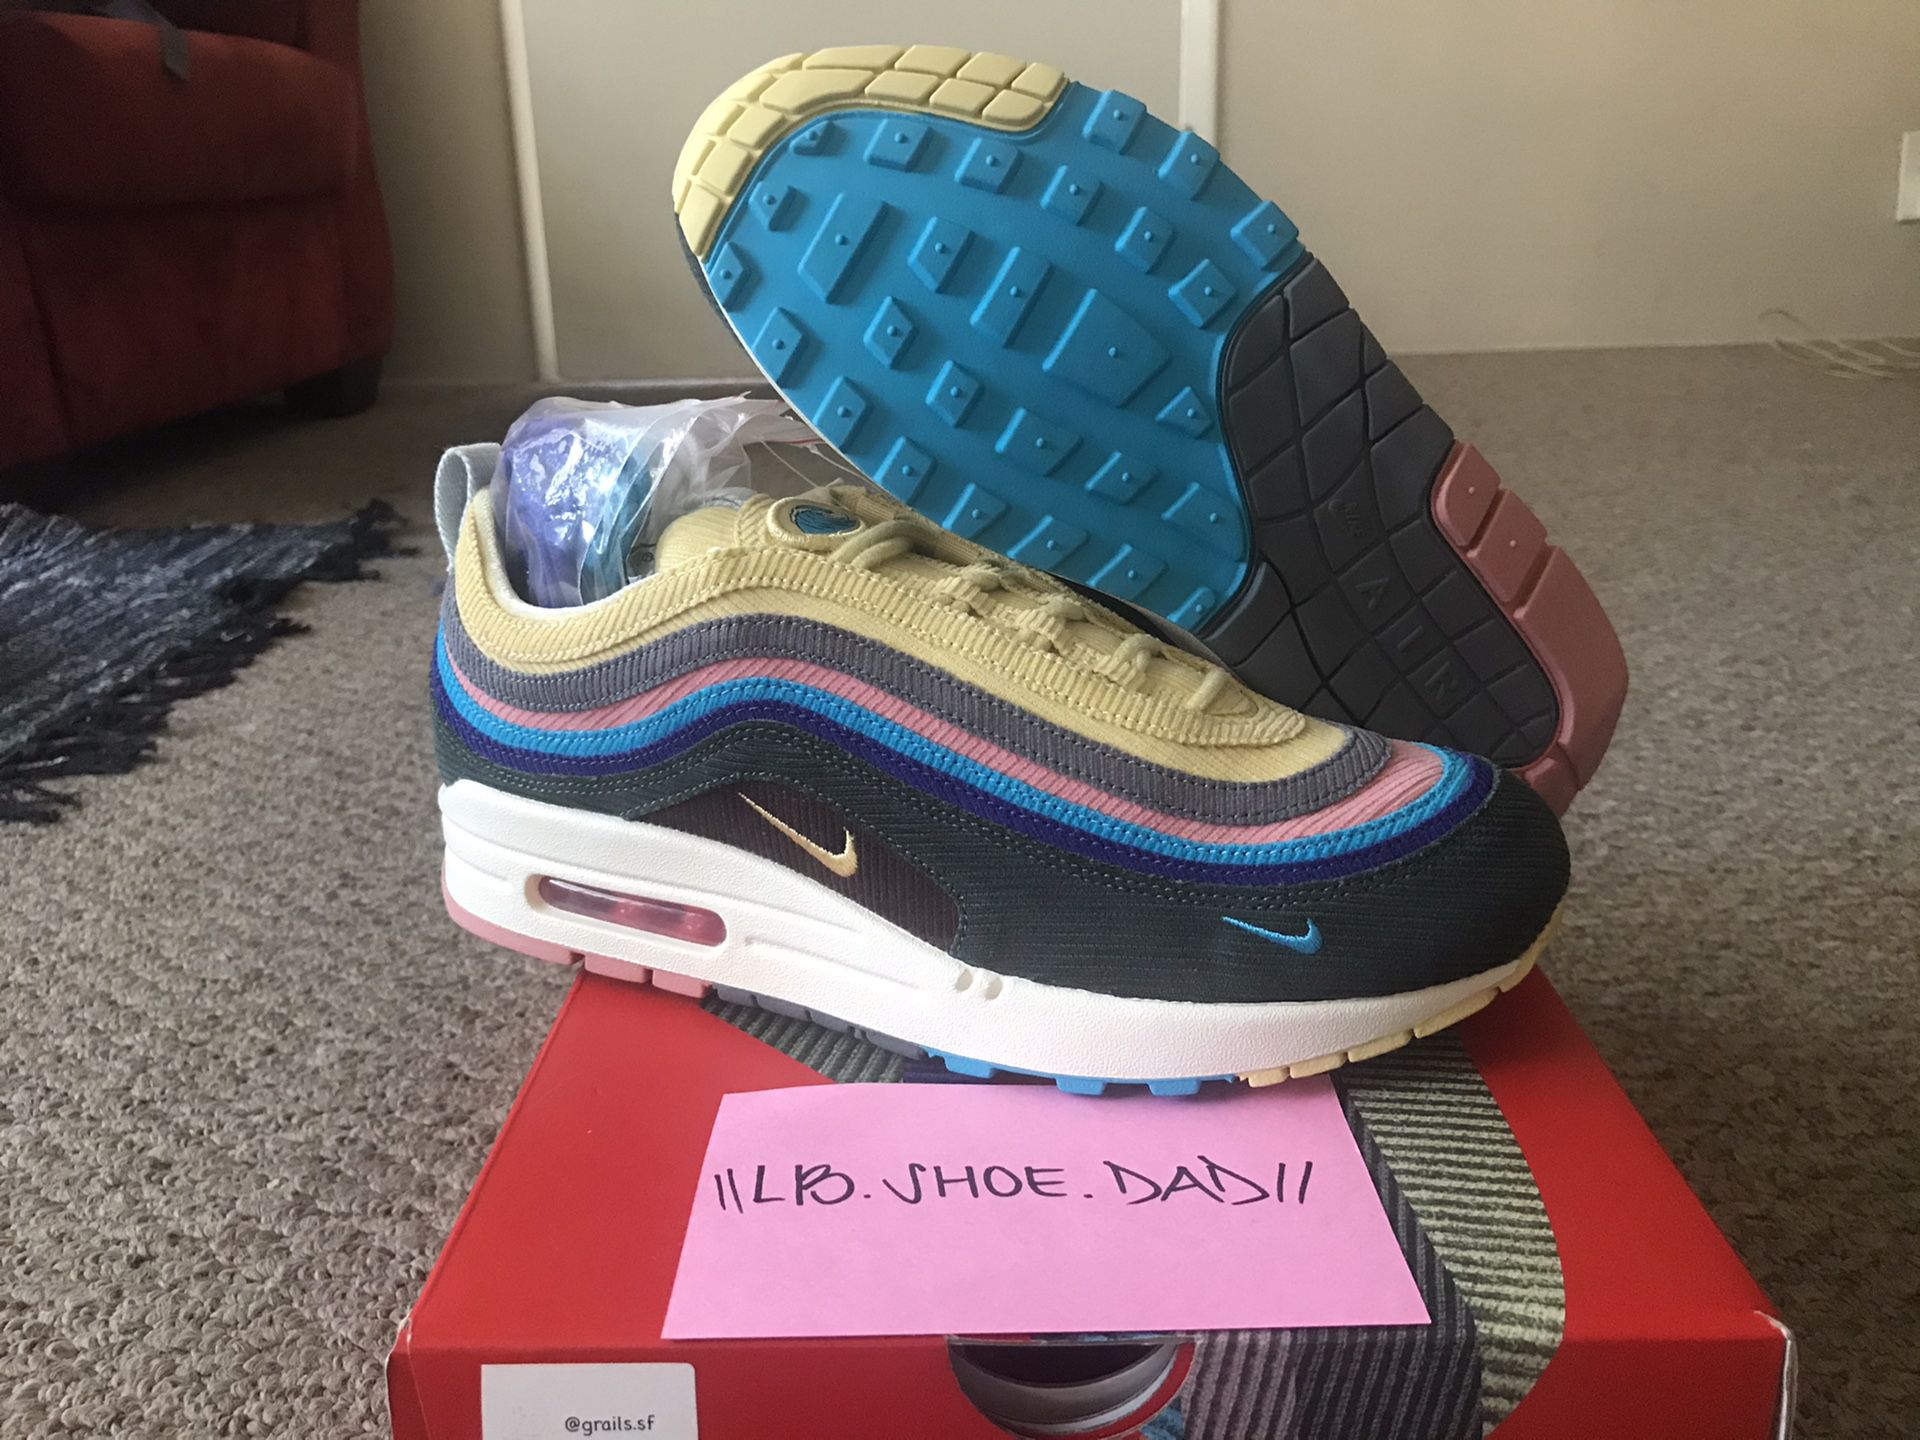 Nike air max 97/1 Sean Wotherspoon DS Sz 8